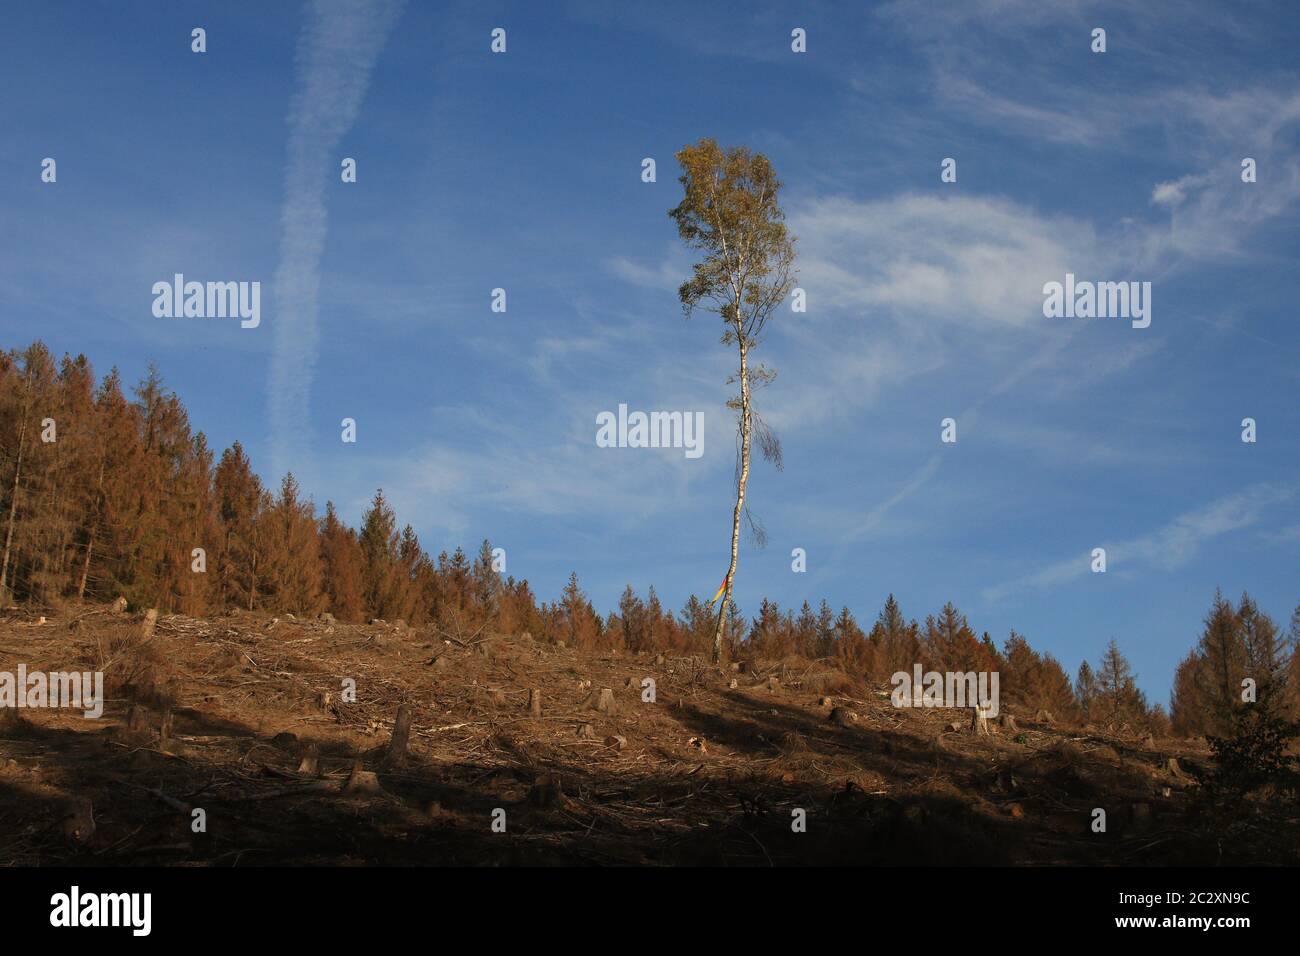 Very last tree standing in a previously wooded area after deforestation Stock Photo